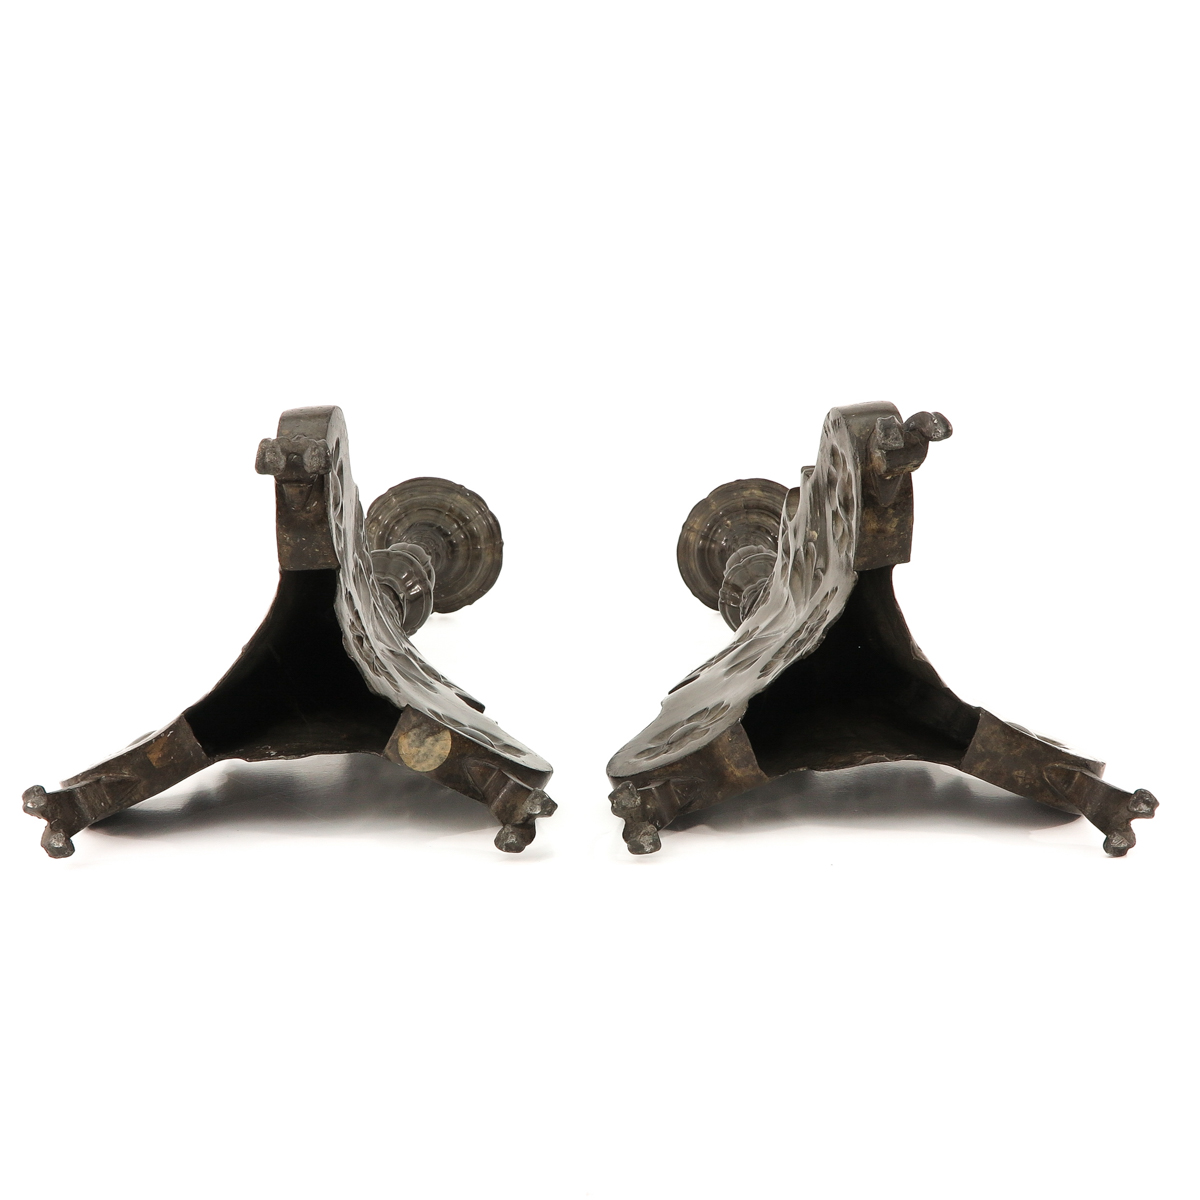 A Pair of 18th - 19th Century Candlesticks - Image 6 of 9